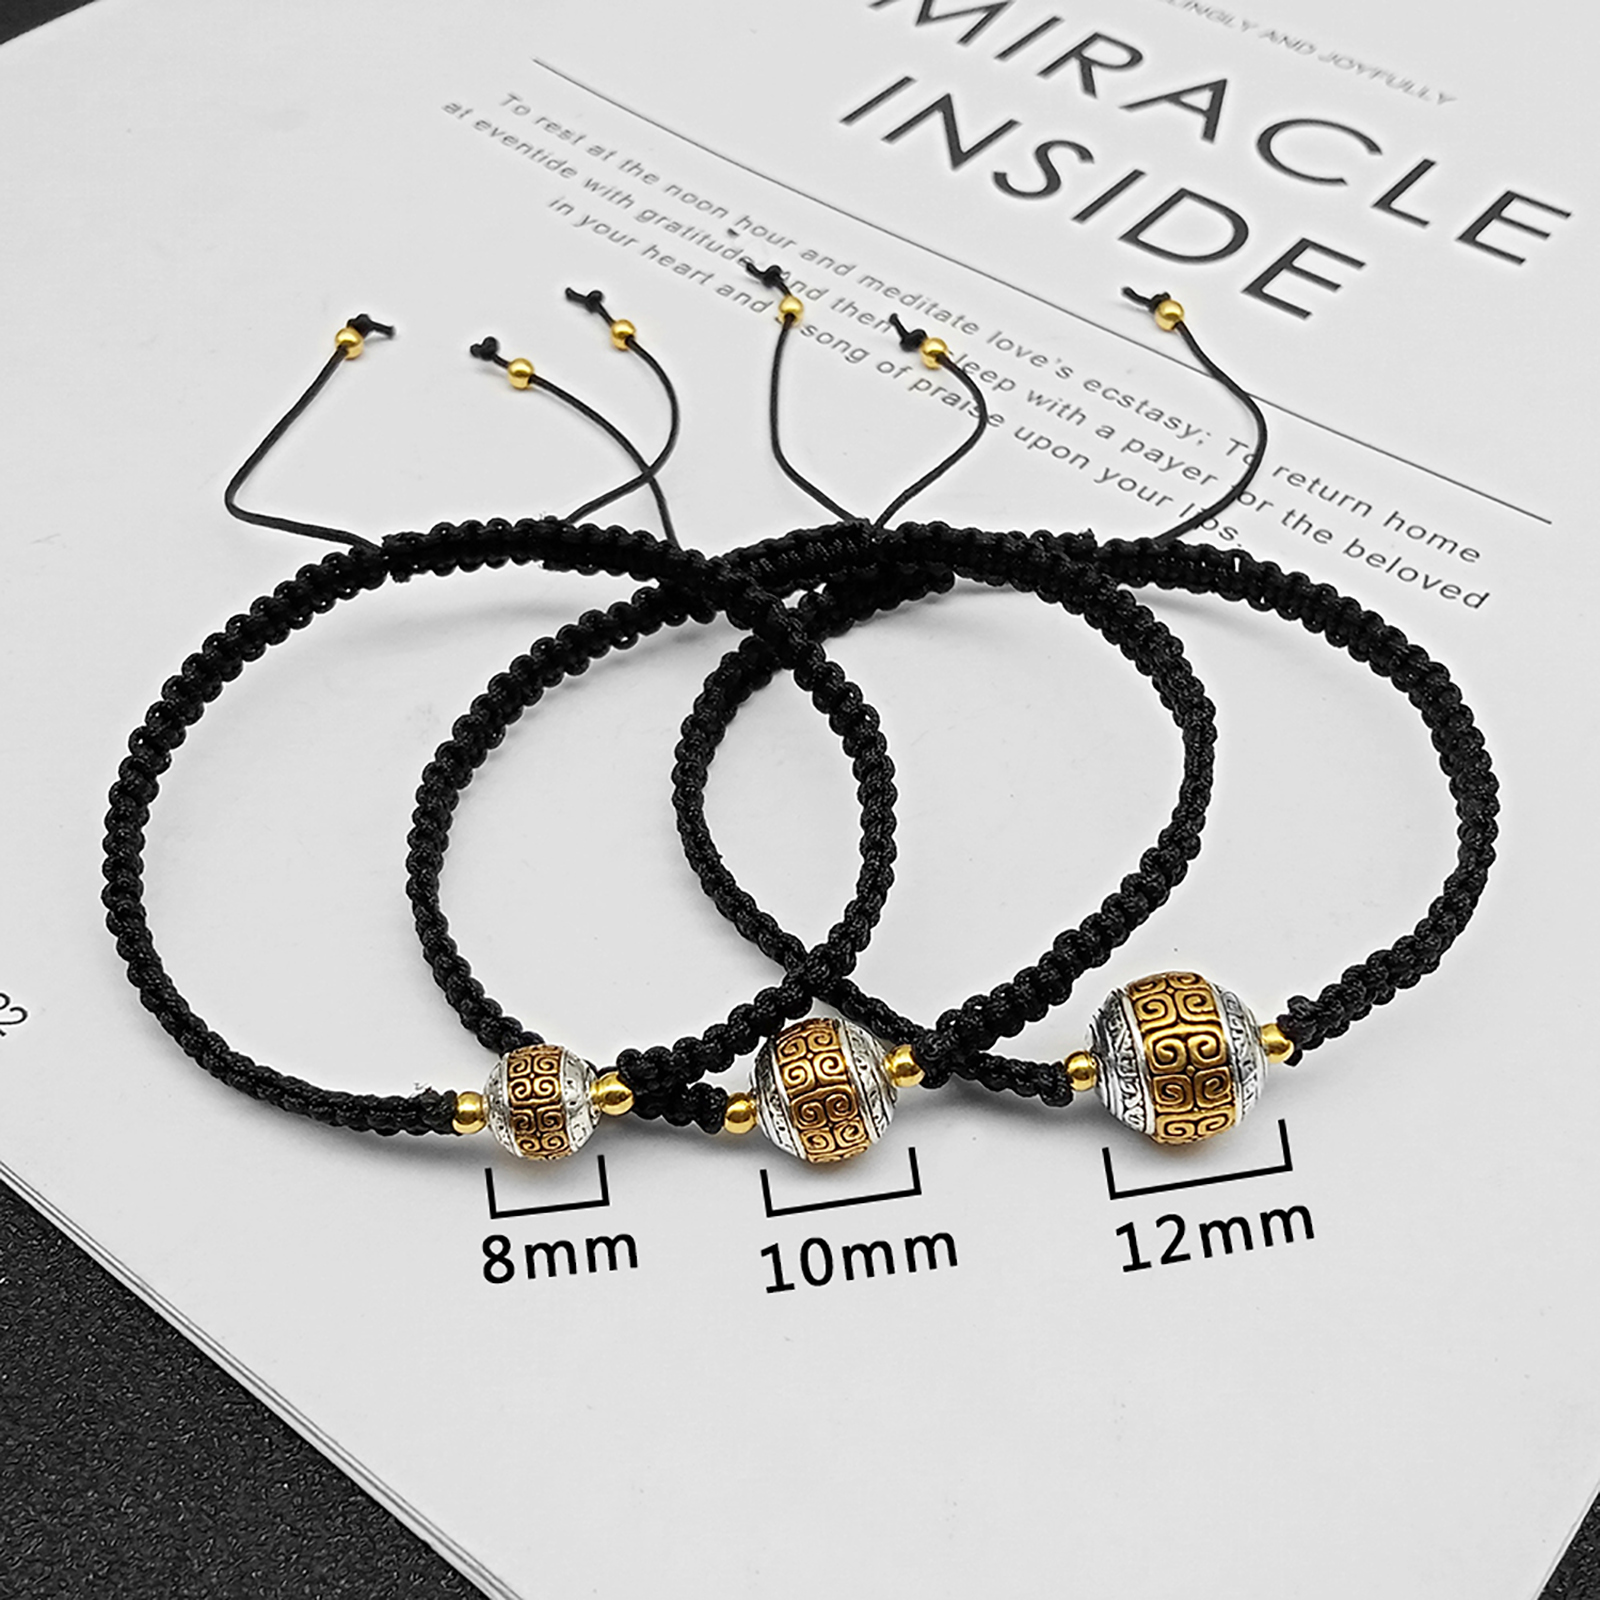 1:The beads are 8mm, 10mm, and 12mm respectively, and the bracelet size is adjustable